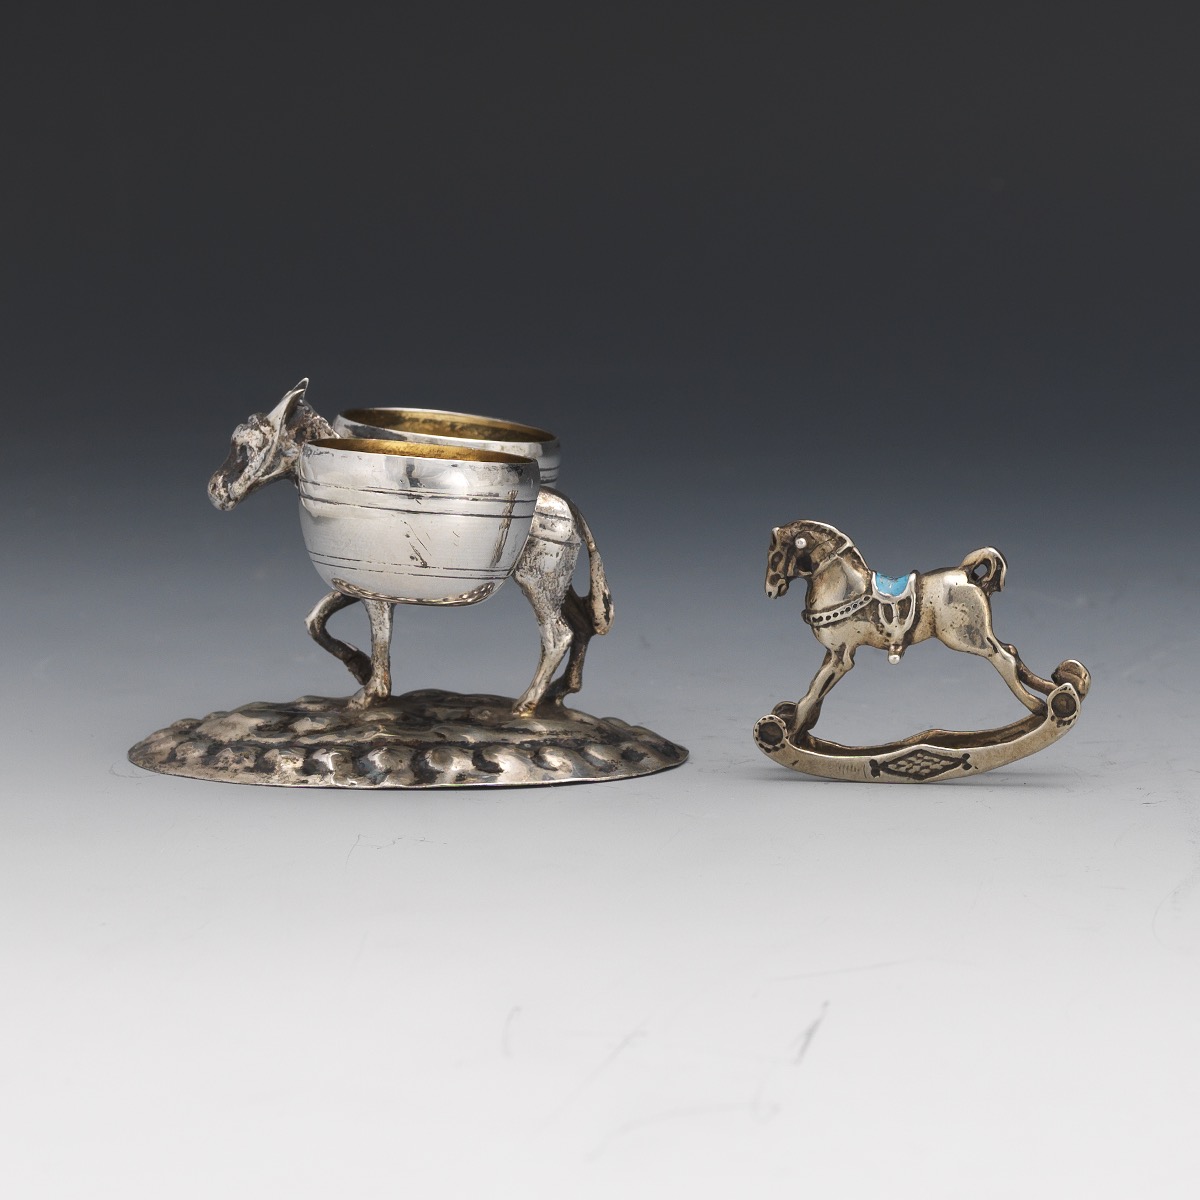 Italian Silver, Gold Wash and Enamel Donkey Salt/Pepper Cellar and Baby Rocking Horse - Image 4 of 7